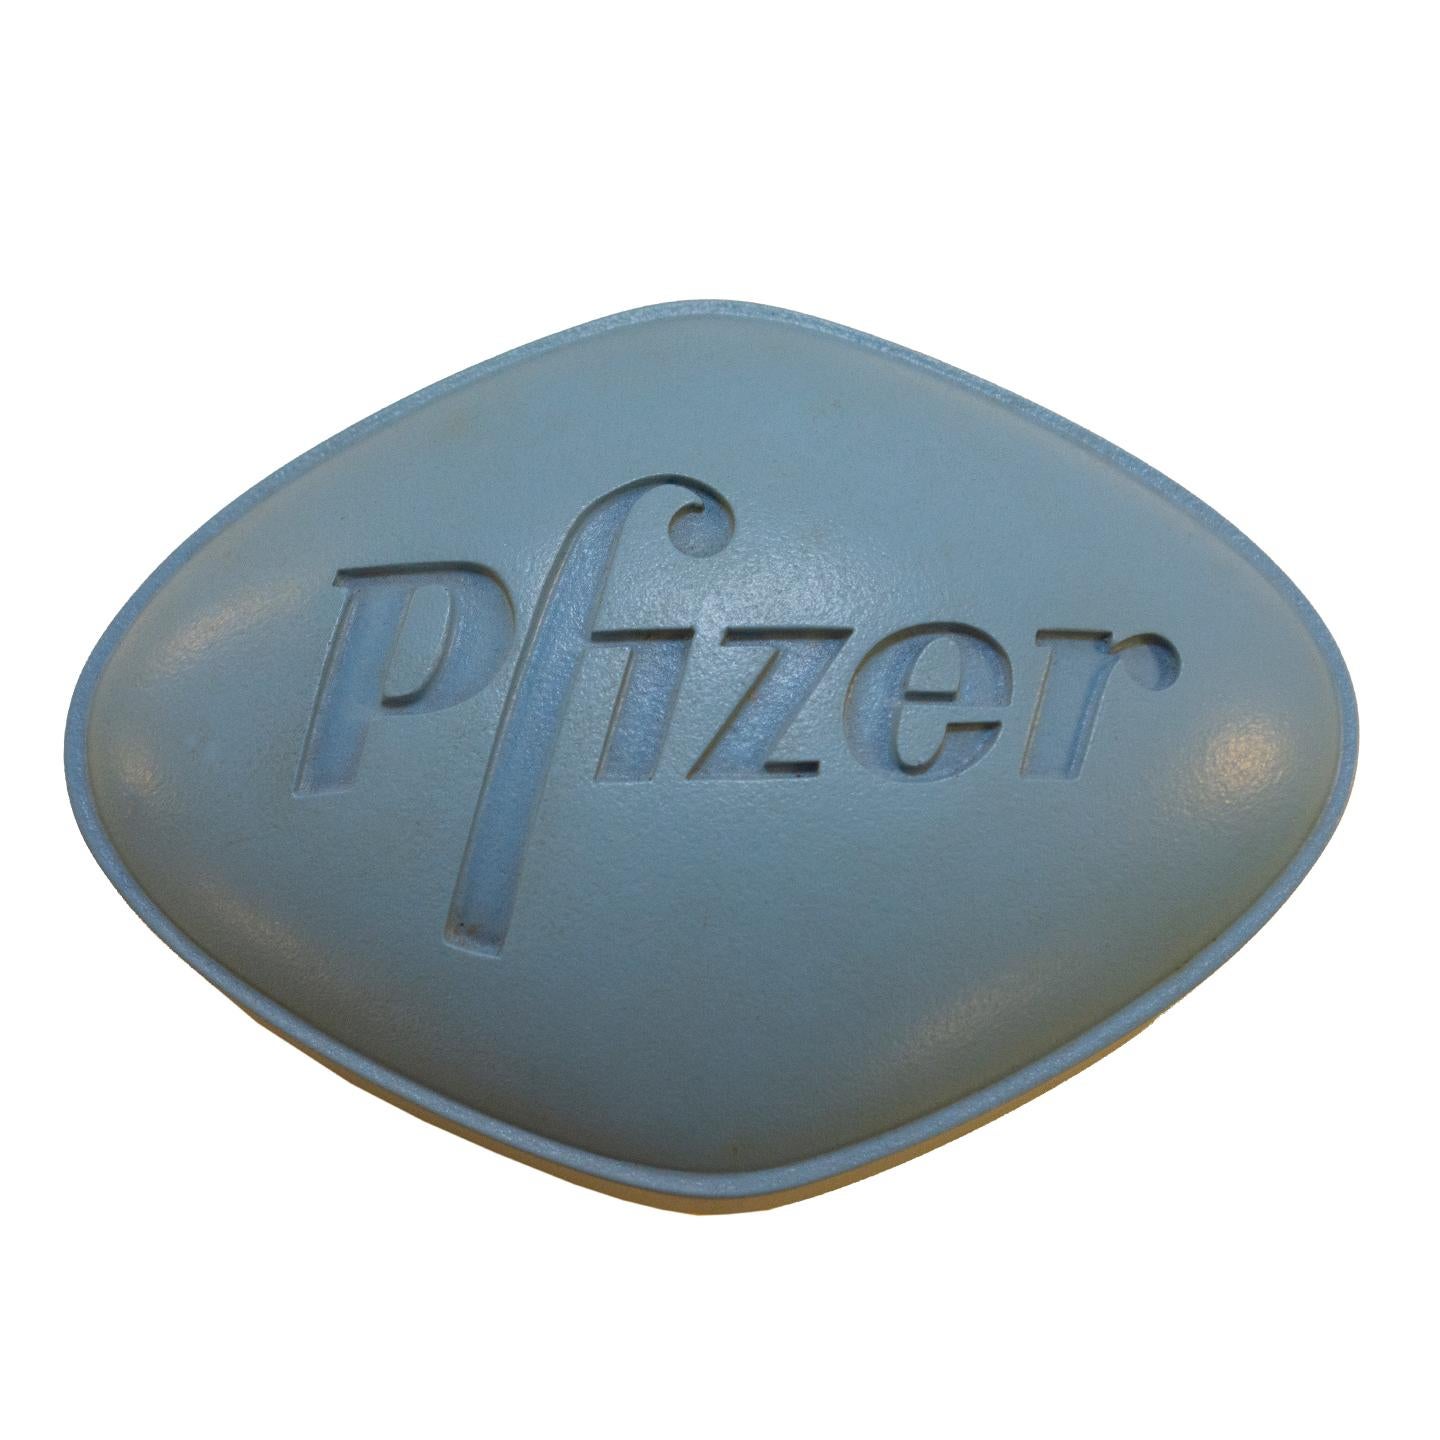 Late 20th Century Sculpture of a Blue Viagra Pill by Mark Yurkiw